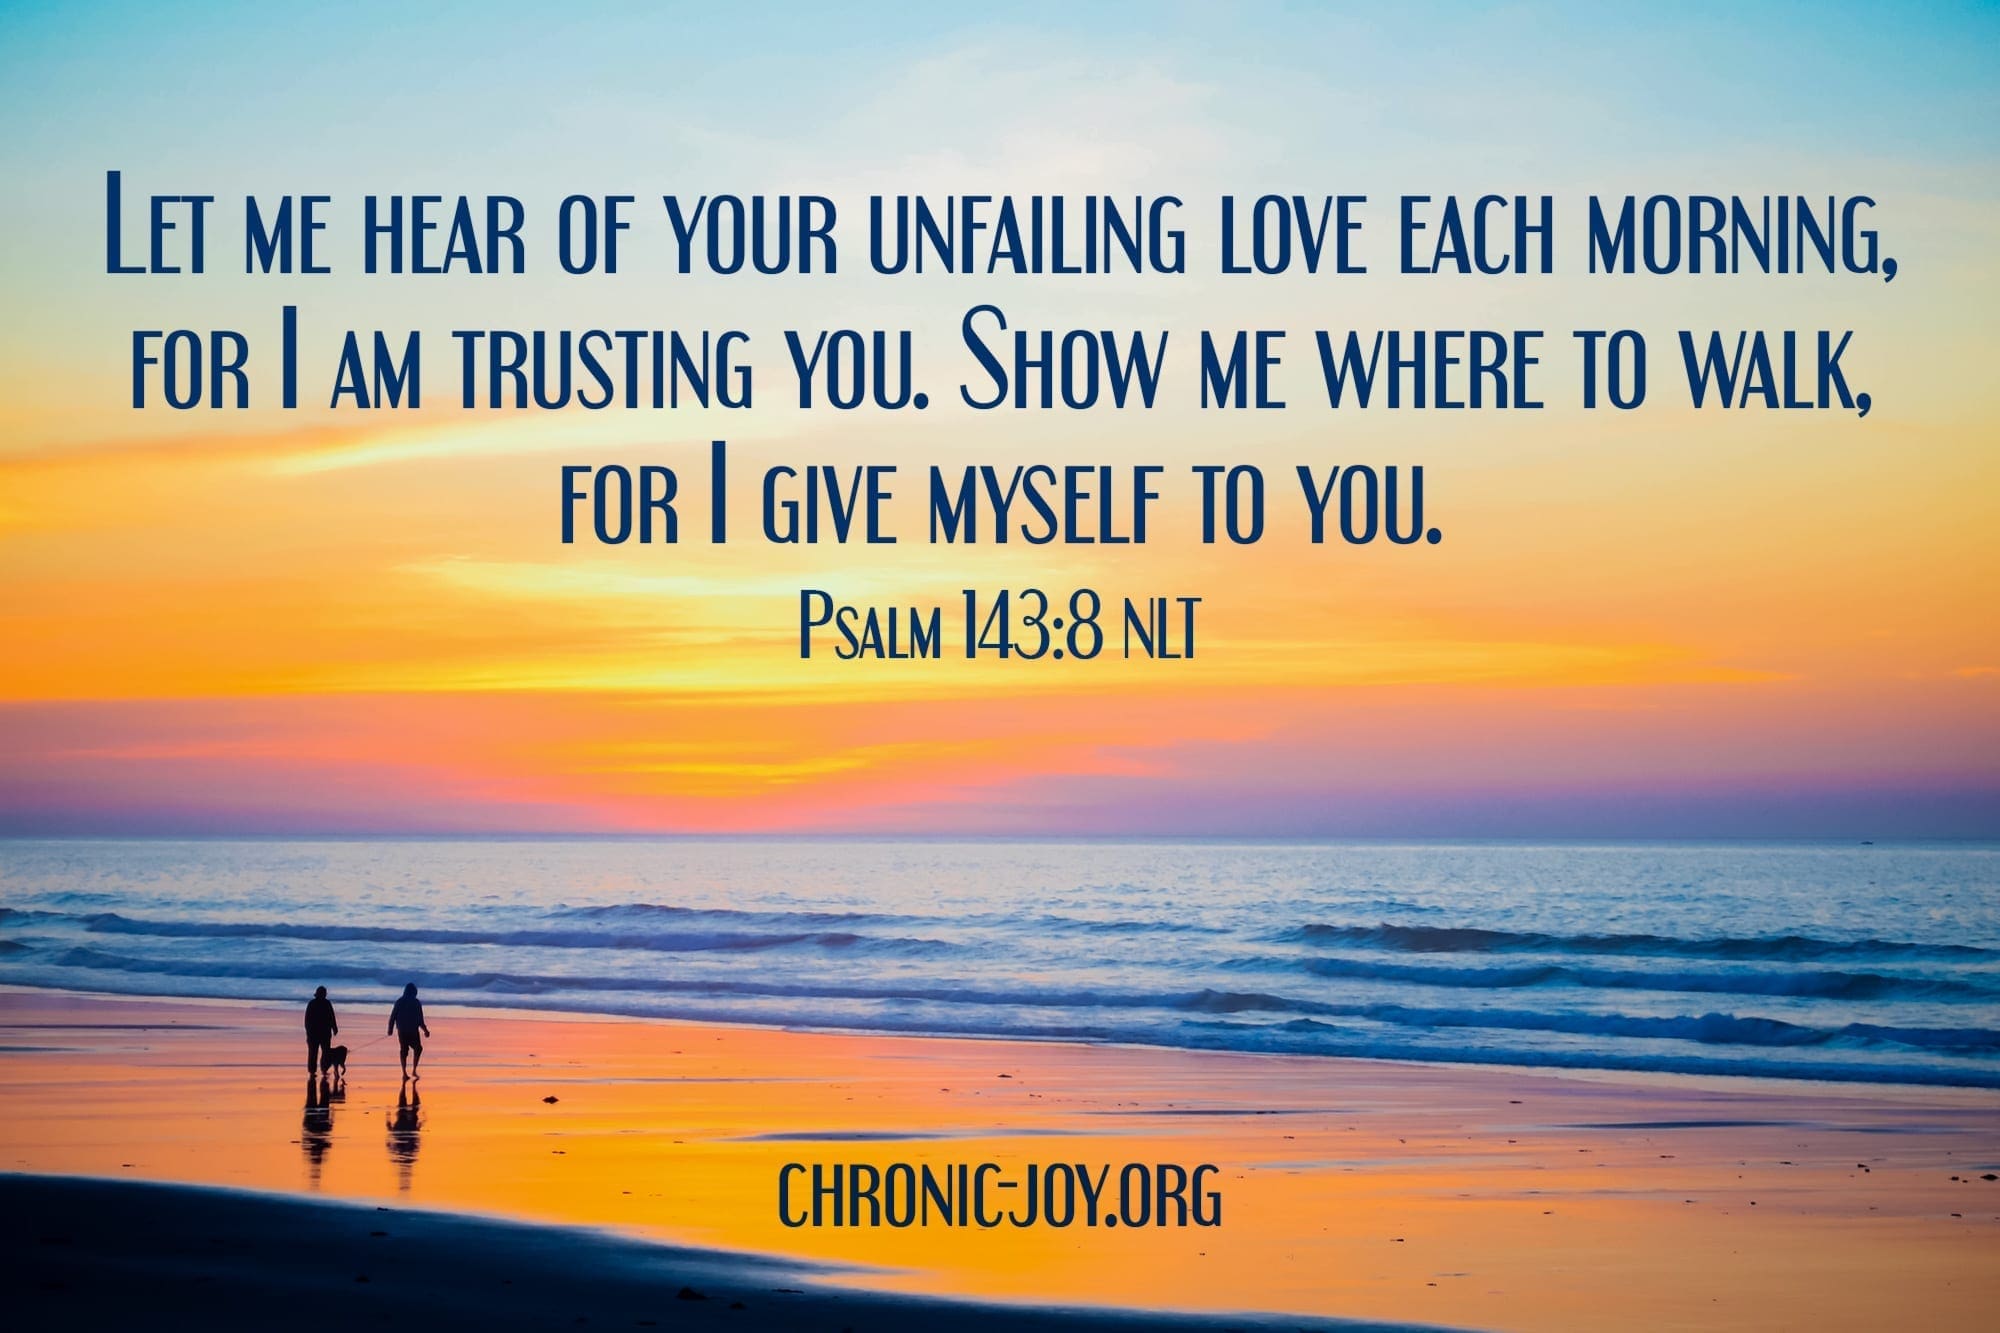 "Let me hear of your unfailing love each morning, for I am trusting you. Show me where to walk, for I give myself to you." Psalm 143:8 NLT